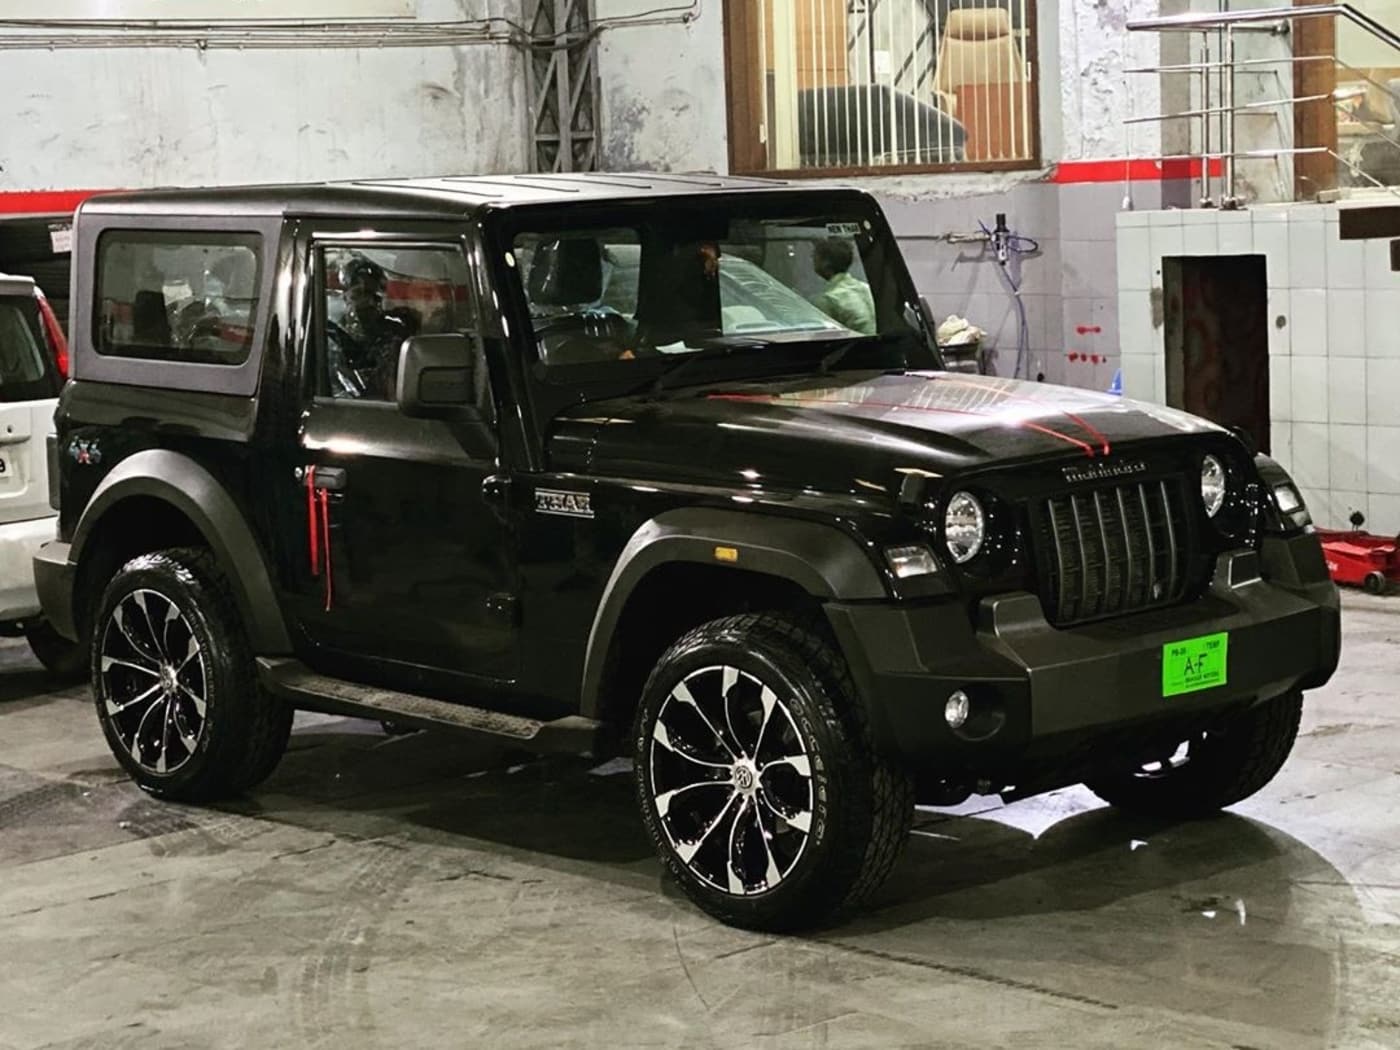 This Modified 2020 Mahindra Thar Looks Cool With Massive 20 Inch Alloys